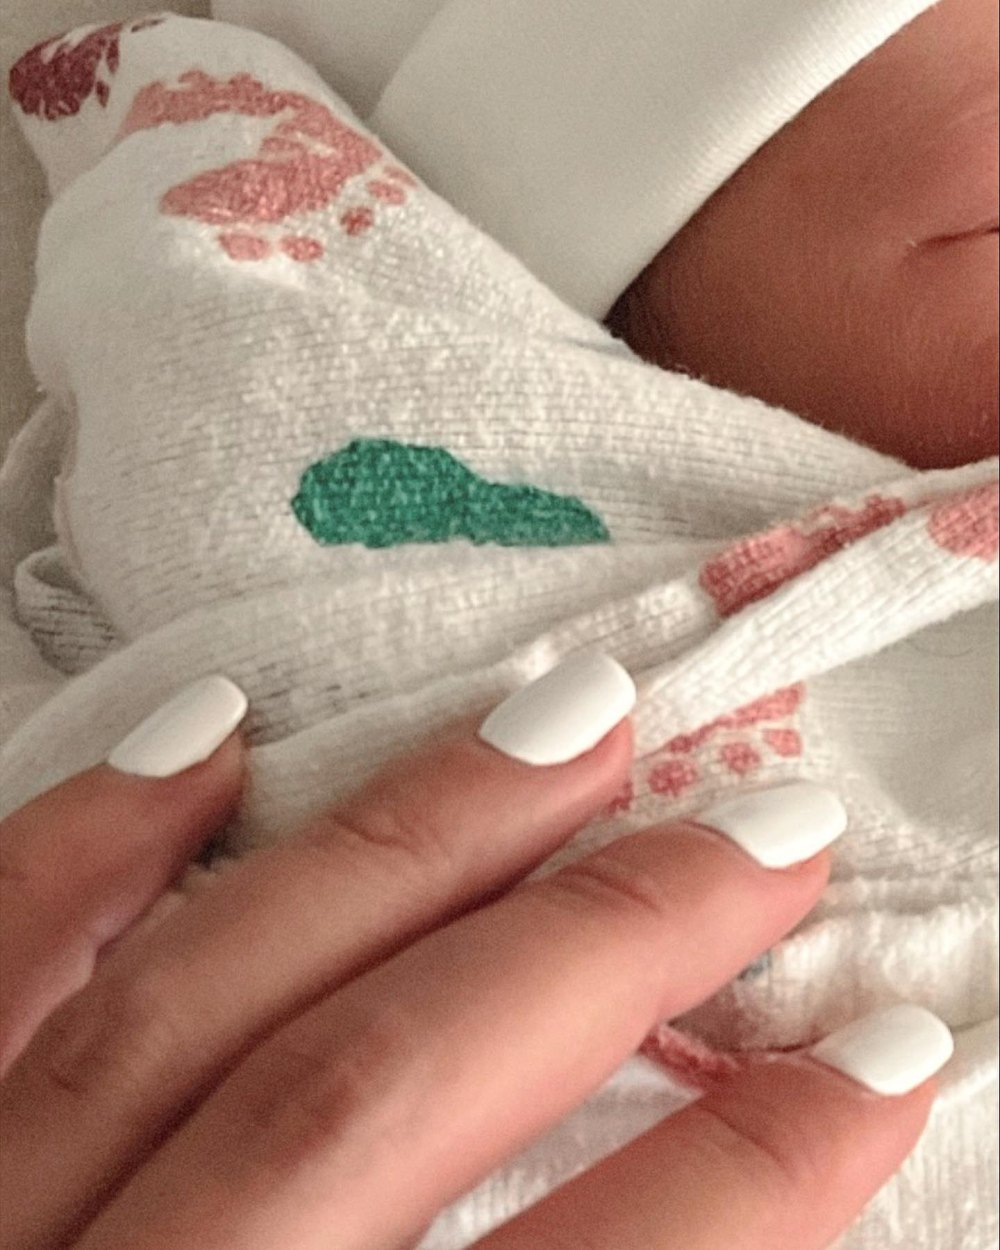 Heather Rae Young Is 'Focusing on Being Present' After Newborn Son's Arrival, Shares New Glimpse of 'Precious' Baby